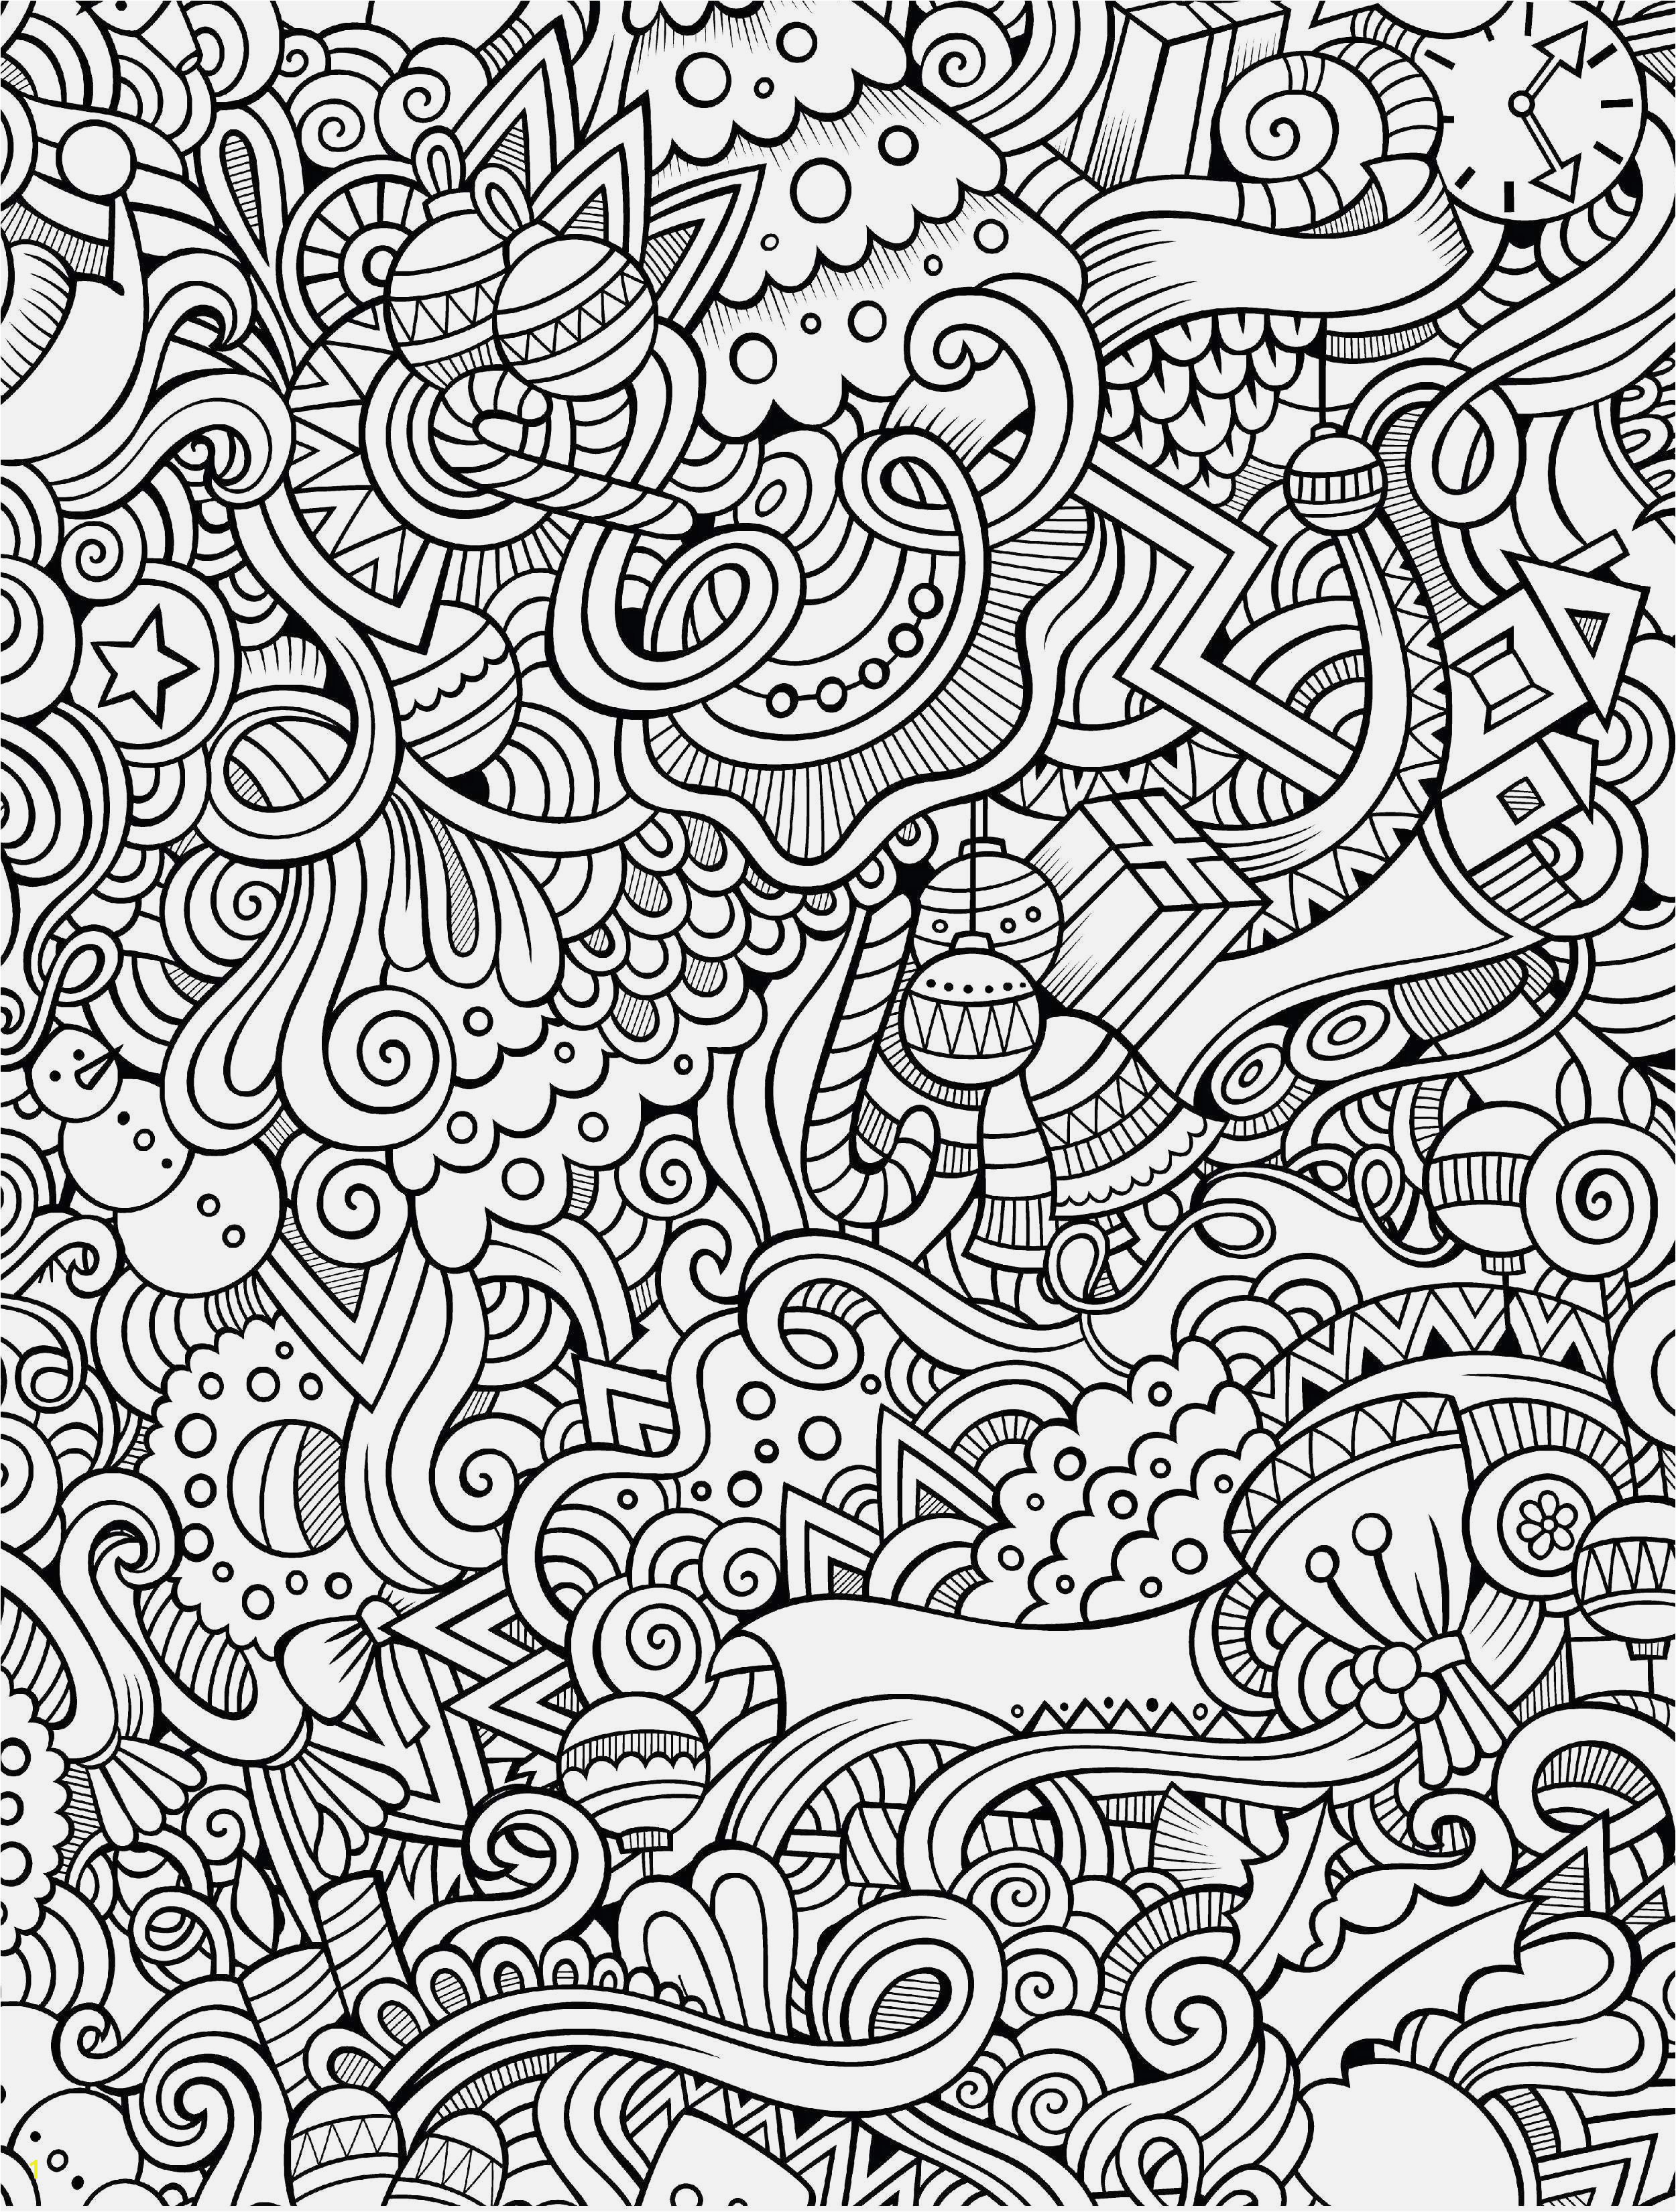 Free Printable Coloring Pages for Adults Advanced Amazing Advantages Christmas Color Pages to Print Free Free Printable Coloring Pages